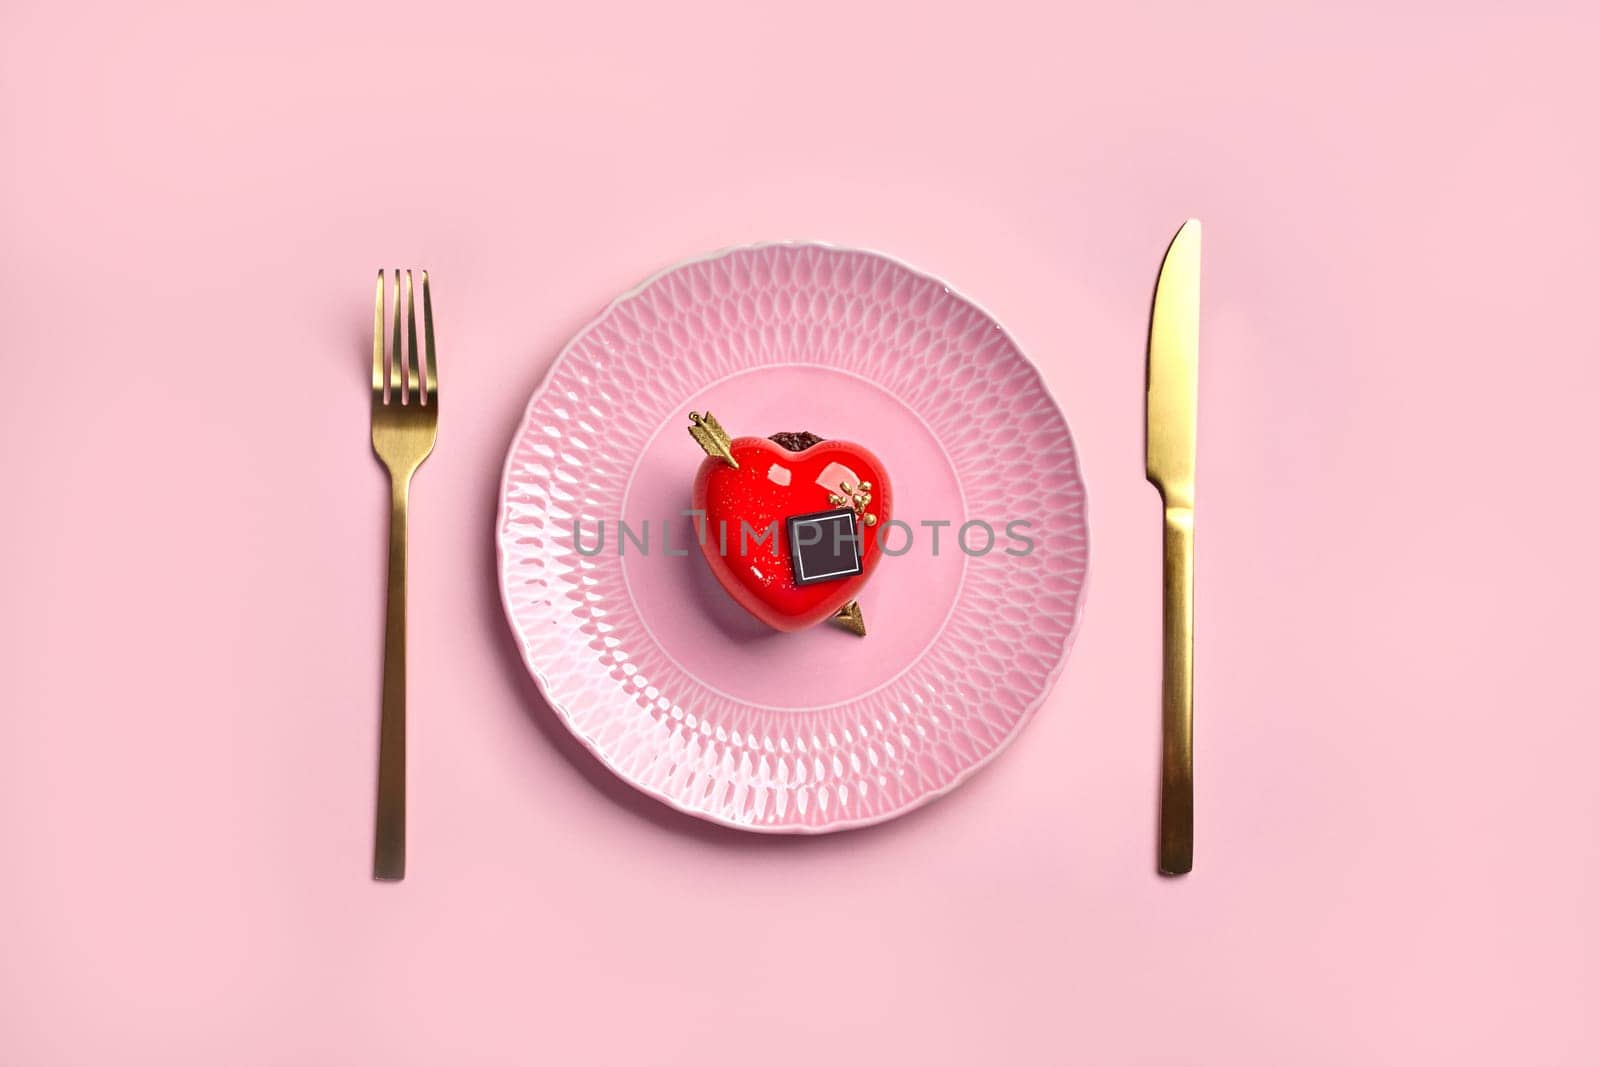 Red heart-shaped strawberry mousse dessert with glossy icing, chocolate and golden arrow elegantly placed on textured porcelain plate with gold cutlery on pink background. Romantic declaration of love